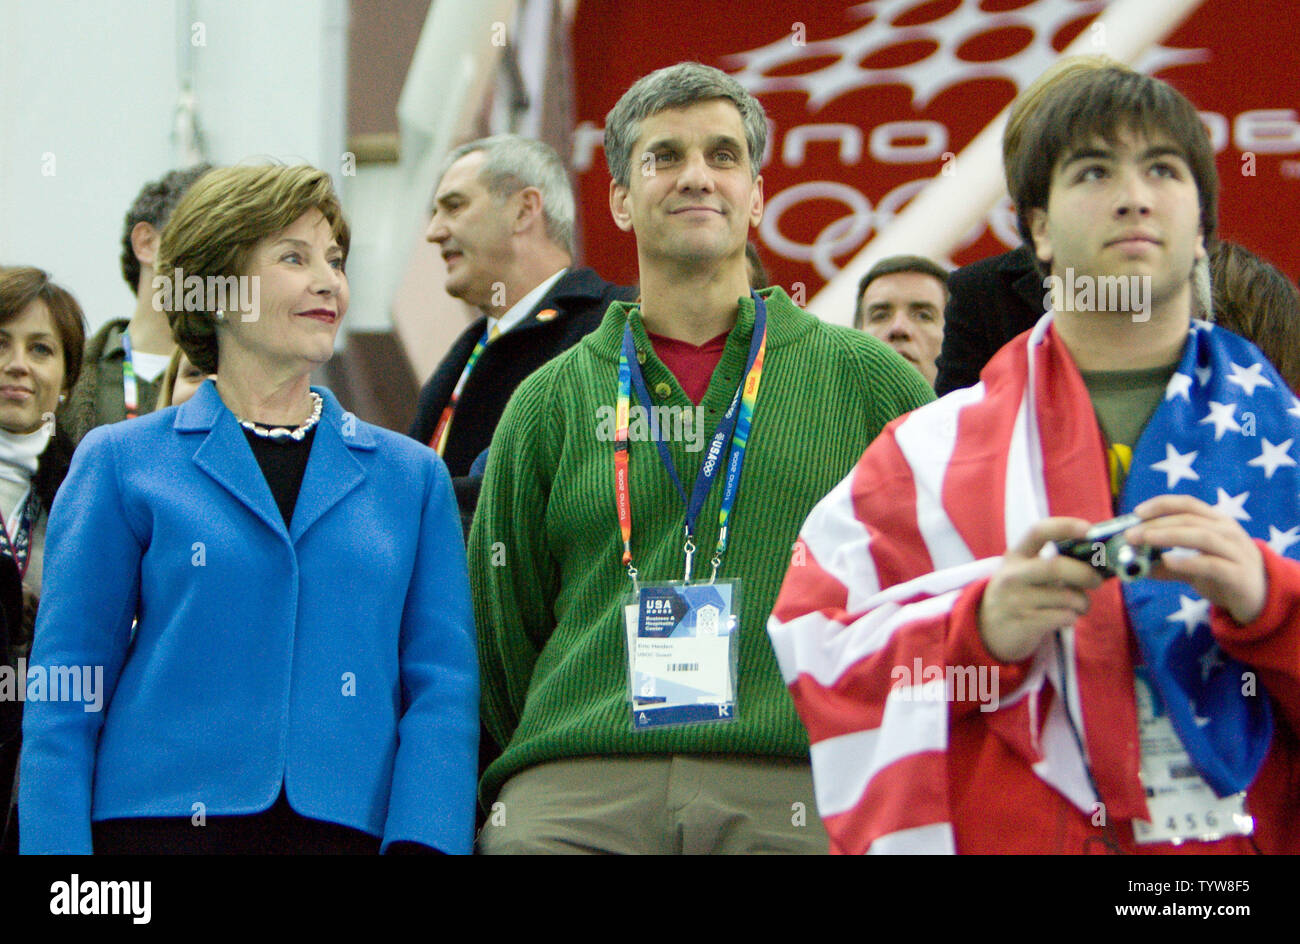 Laura Bush the wife of the President of the USA with Eric Heiden (R) attends men's 5000m speed skating at Oval Lingotto in the 2006 Torino Winter Olympic Games, February 11, 2006, where Chad Hendrick of the USA wins gold.  (UPI Photo/Heinz Ruckemann) Stock Photo